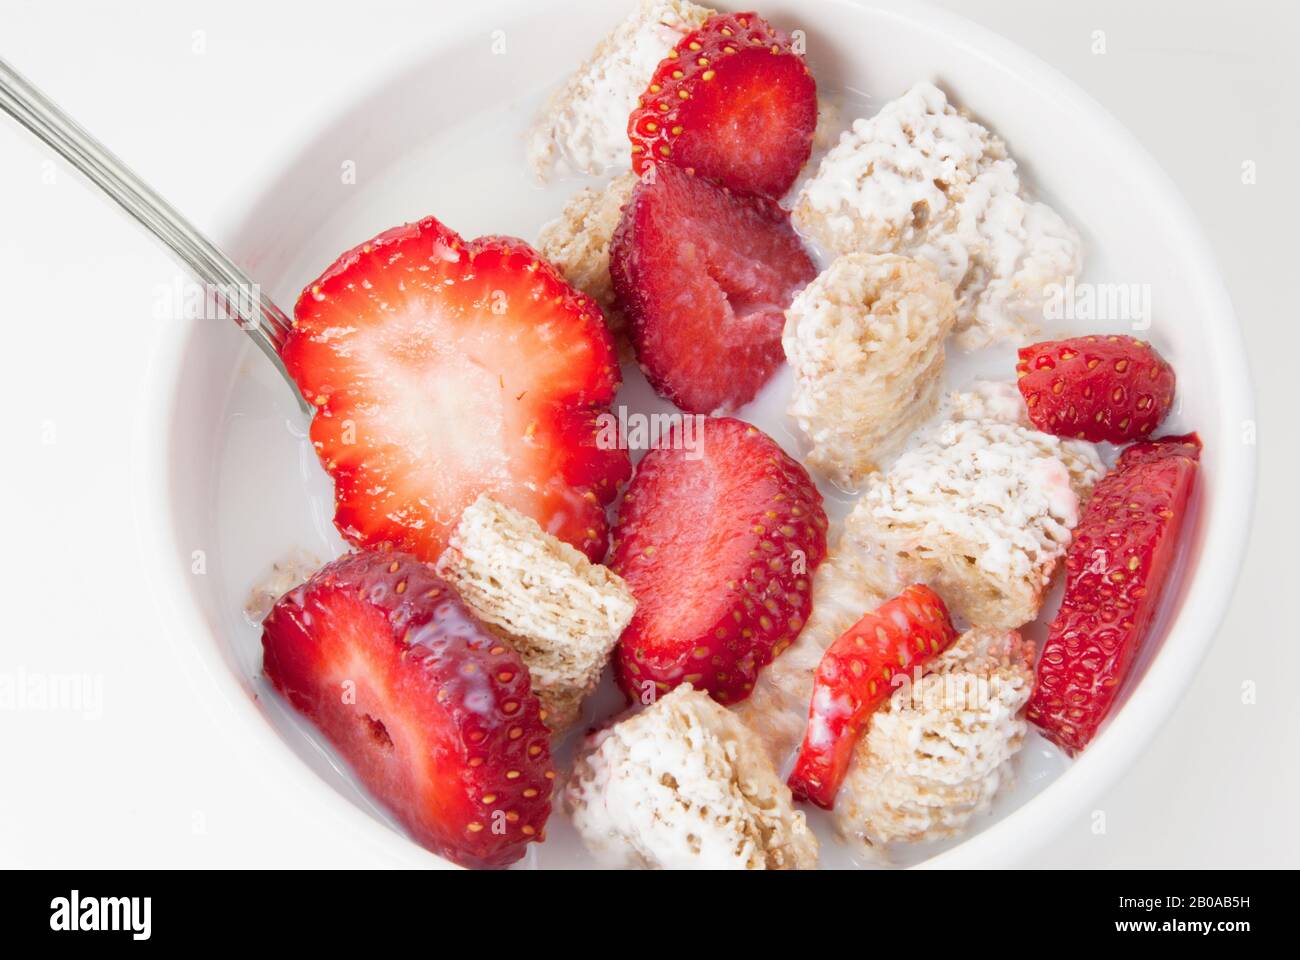 Sugar coated shredded wheat cereal served in a bowl with milk and sliced strawberries. Stock Photo